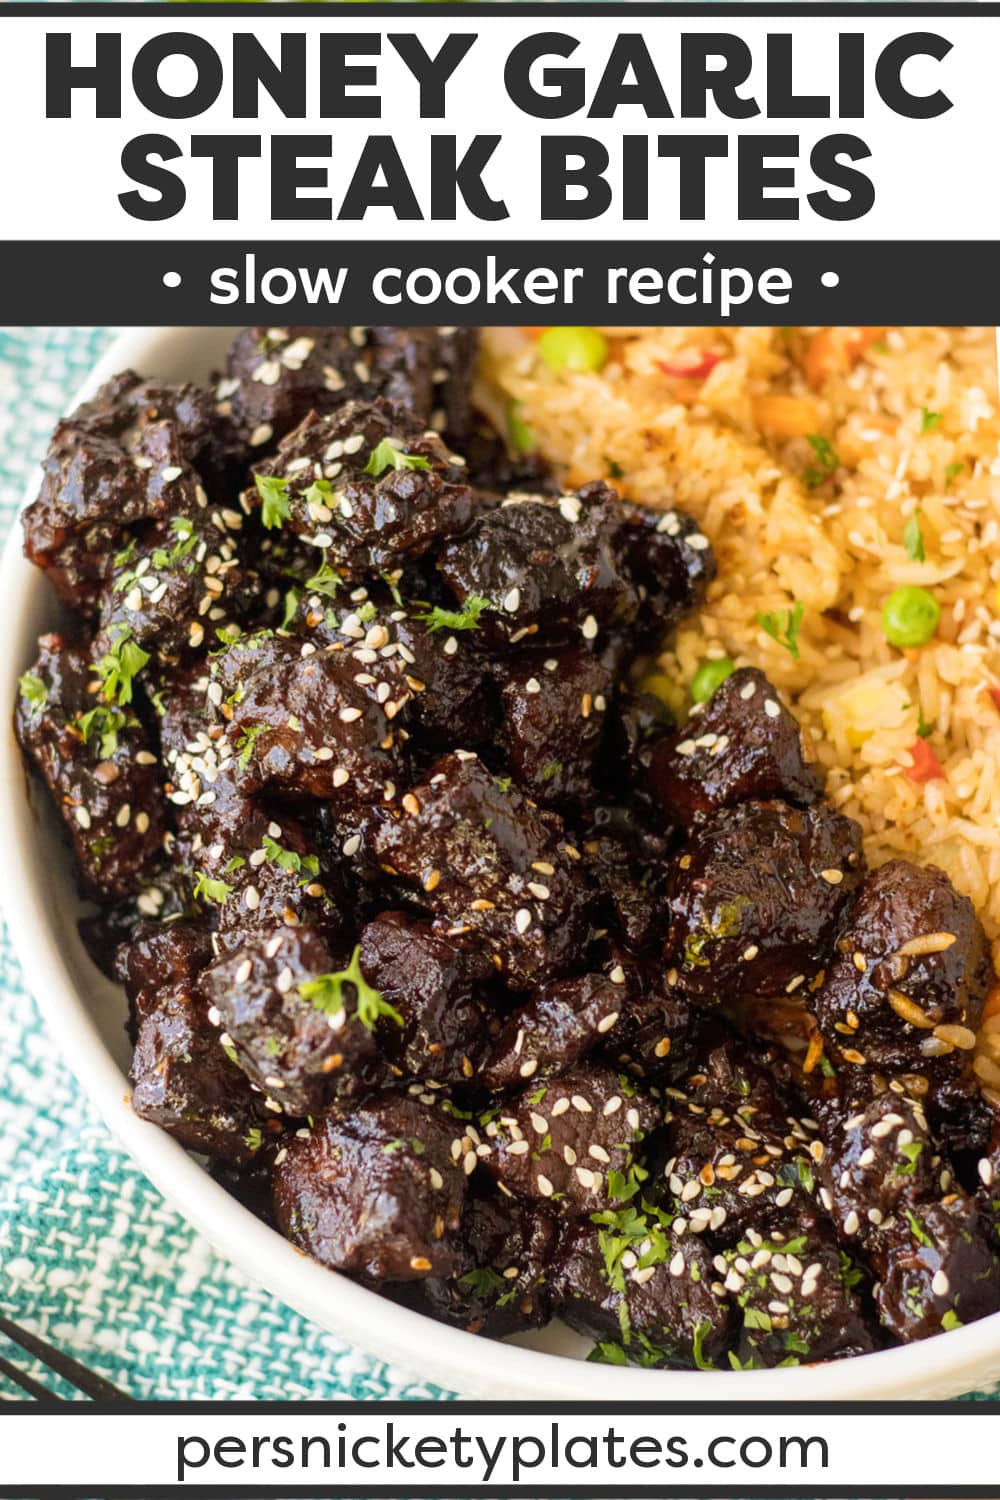 Slow cooker honey garlic steak bites are an easy way to make an impressive meal everyone will love. Seared steak bites are cooked low and slow in the crockpot in a quick honey garlic sauce until fall-apart tender and full of flavor. Served over rice or noodles for a comforting meal or on a mini skewer for a game day appetizer! | www.persnicketyplates.com